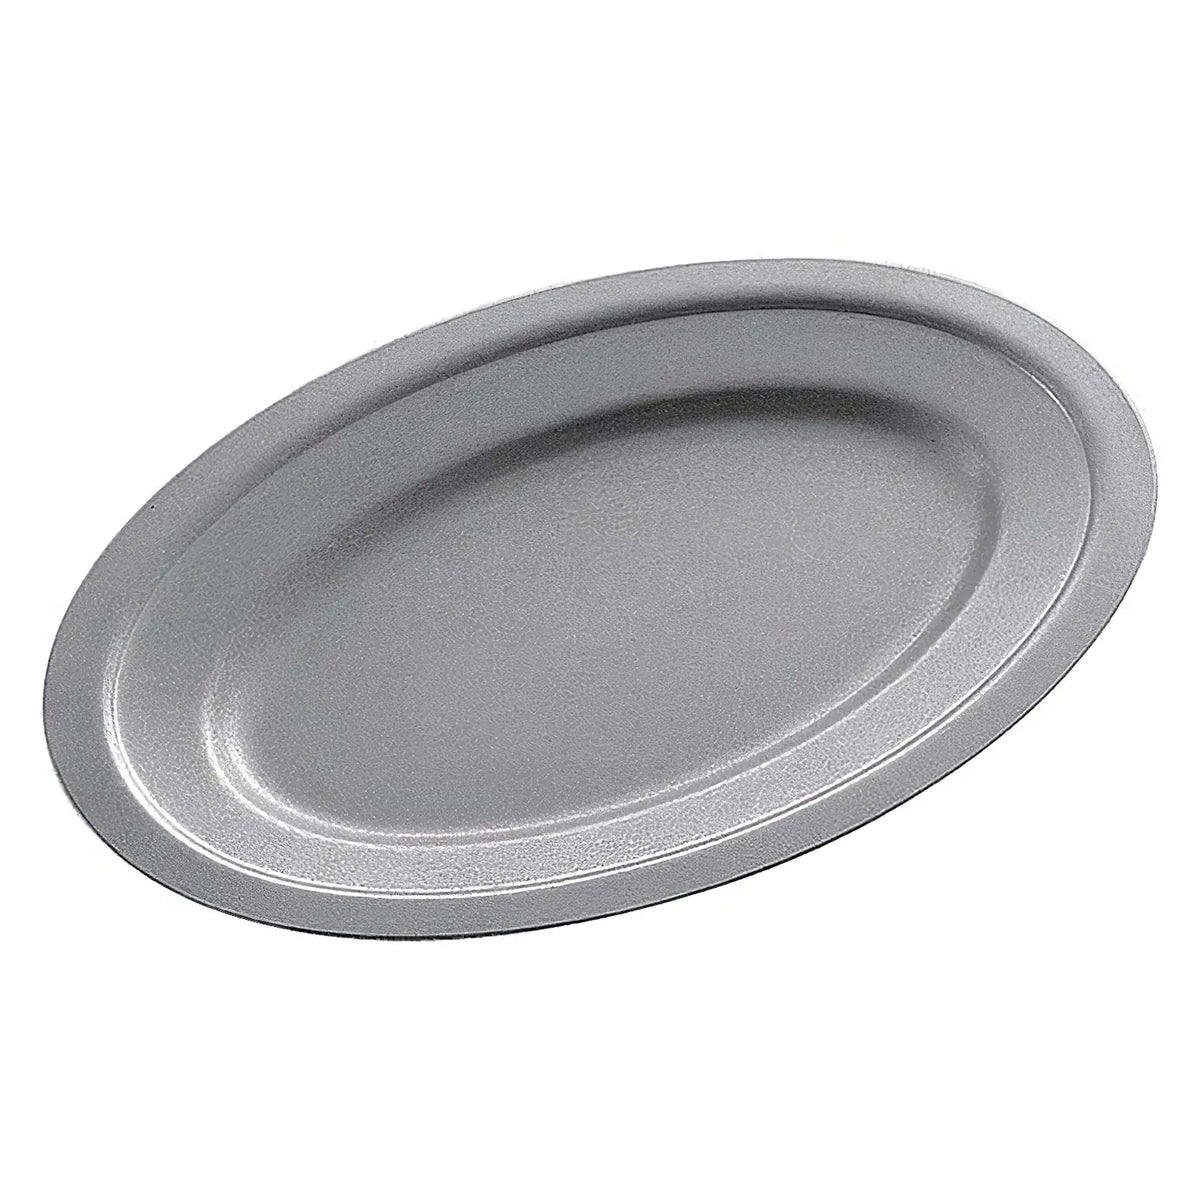 AOYOSHI VINTAGE Stainless Steel Oval Plate